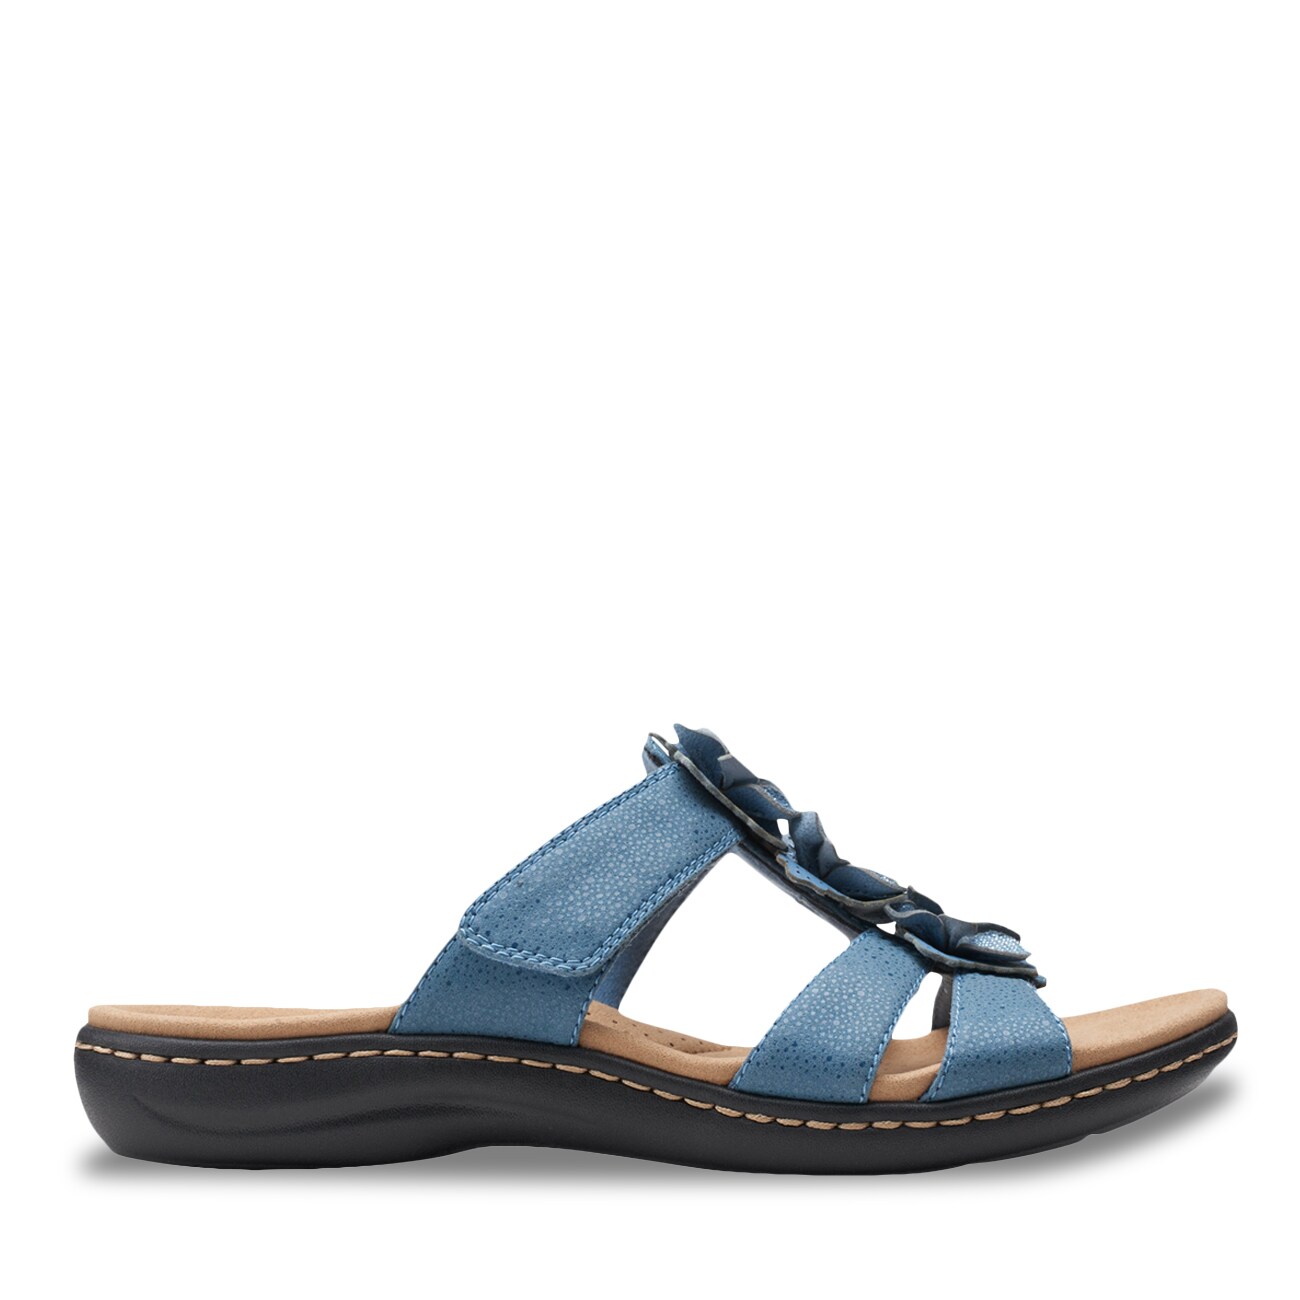 clarks wave sandals canada